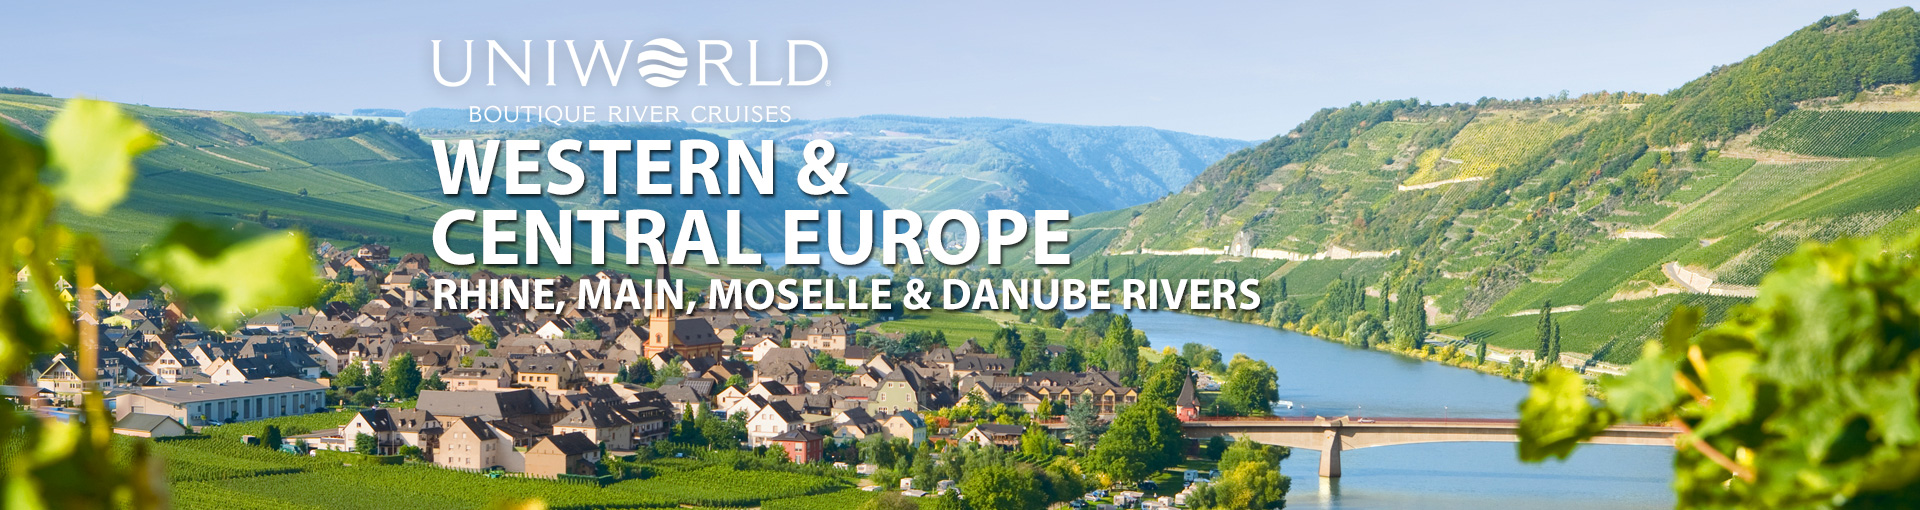 Uniworld River Cruises to Western and Central Europe